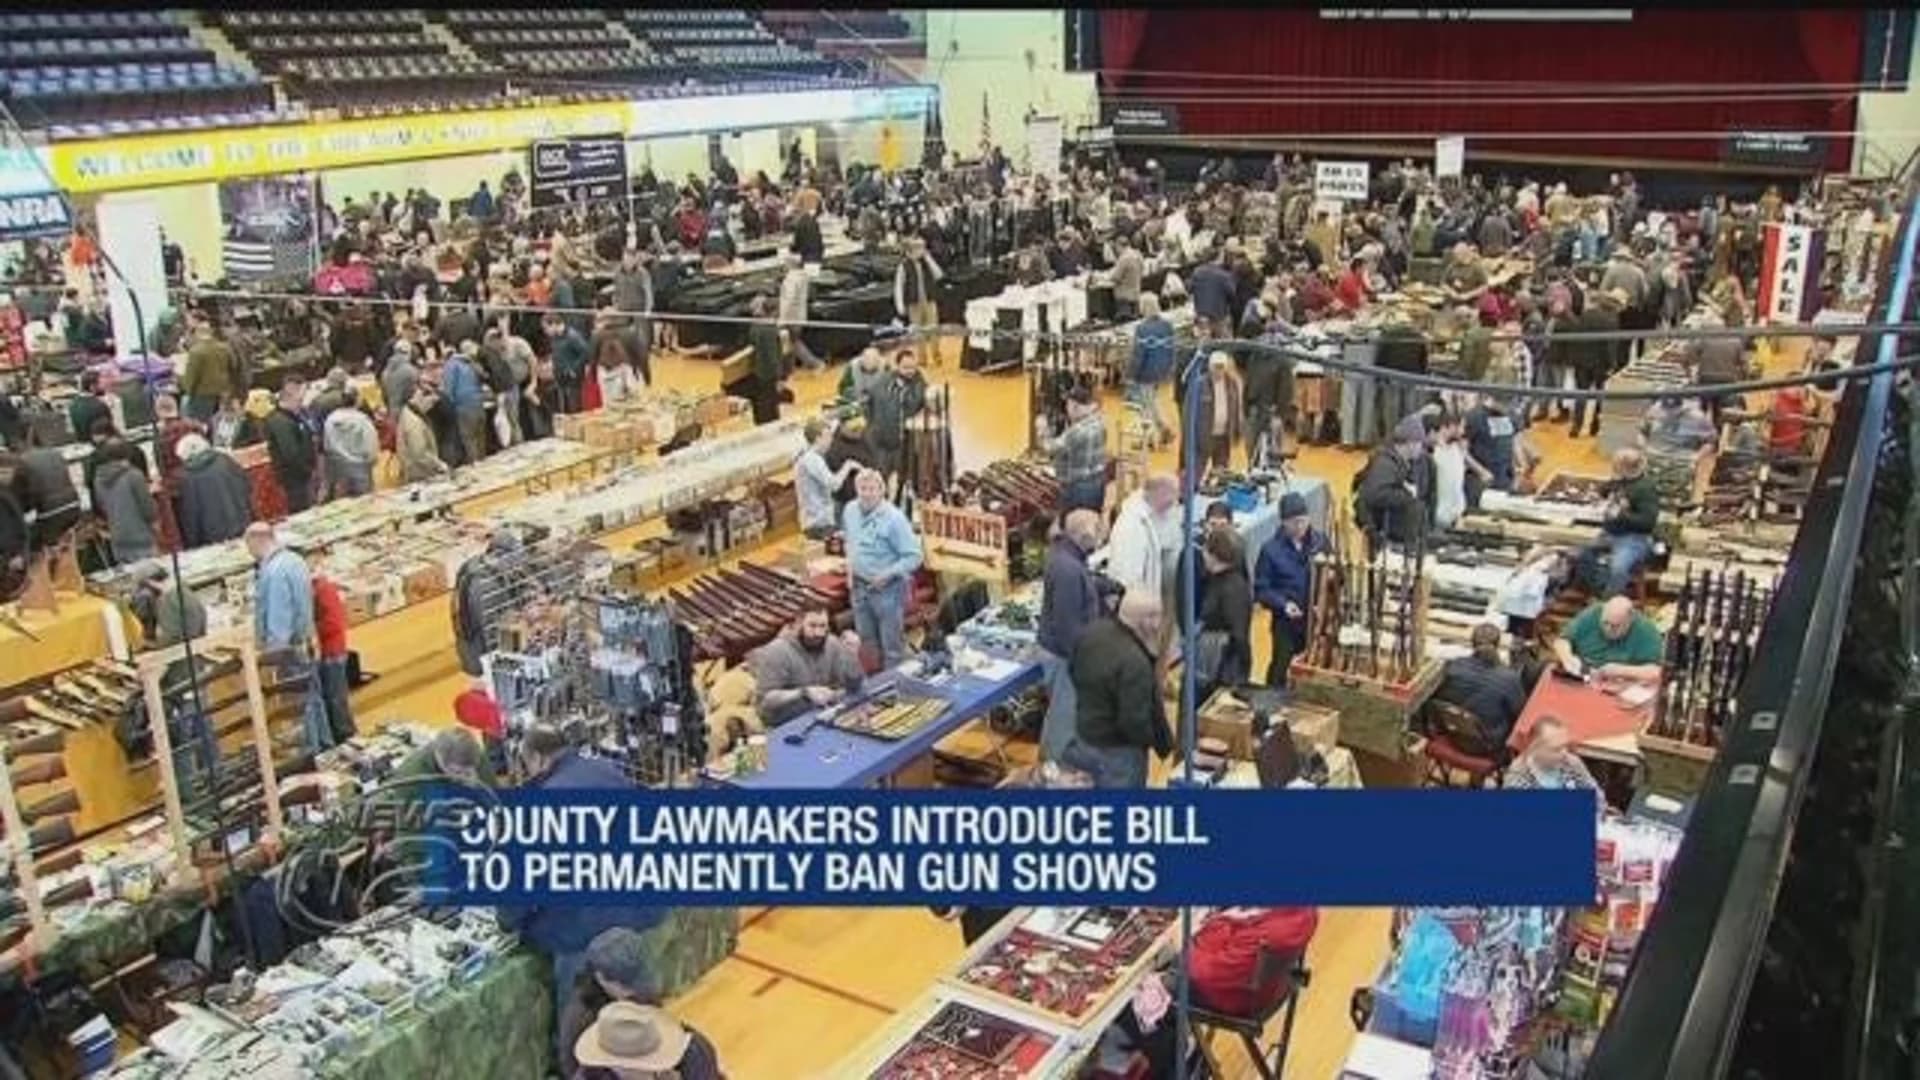 WC lawmakers introduce bill to permanently ban gun shows